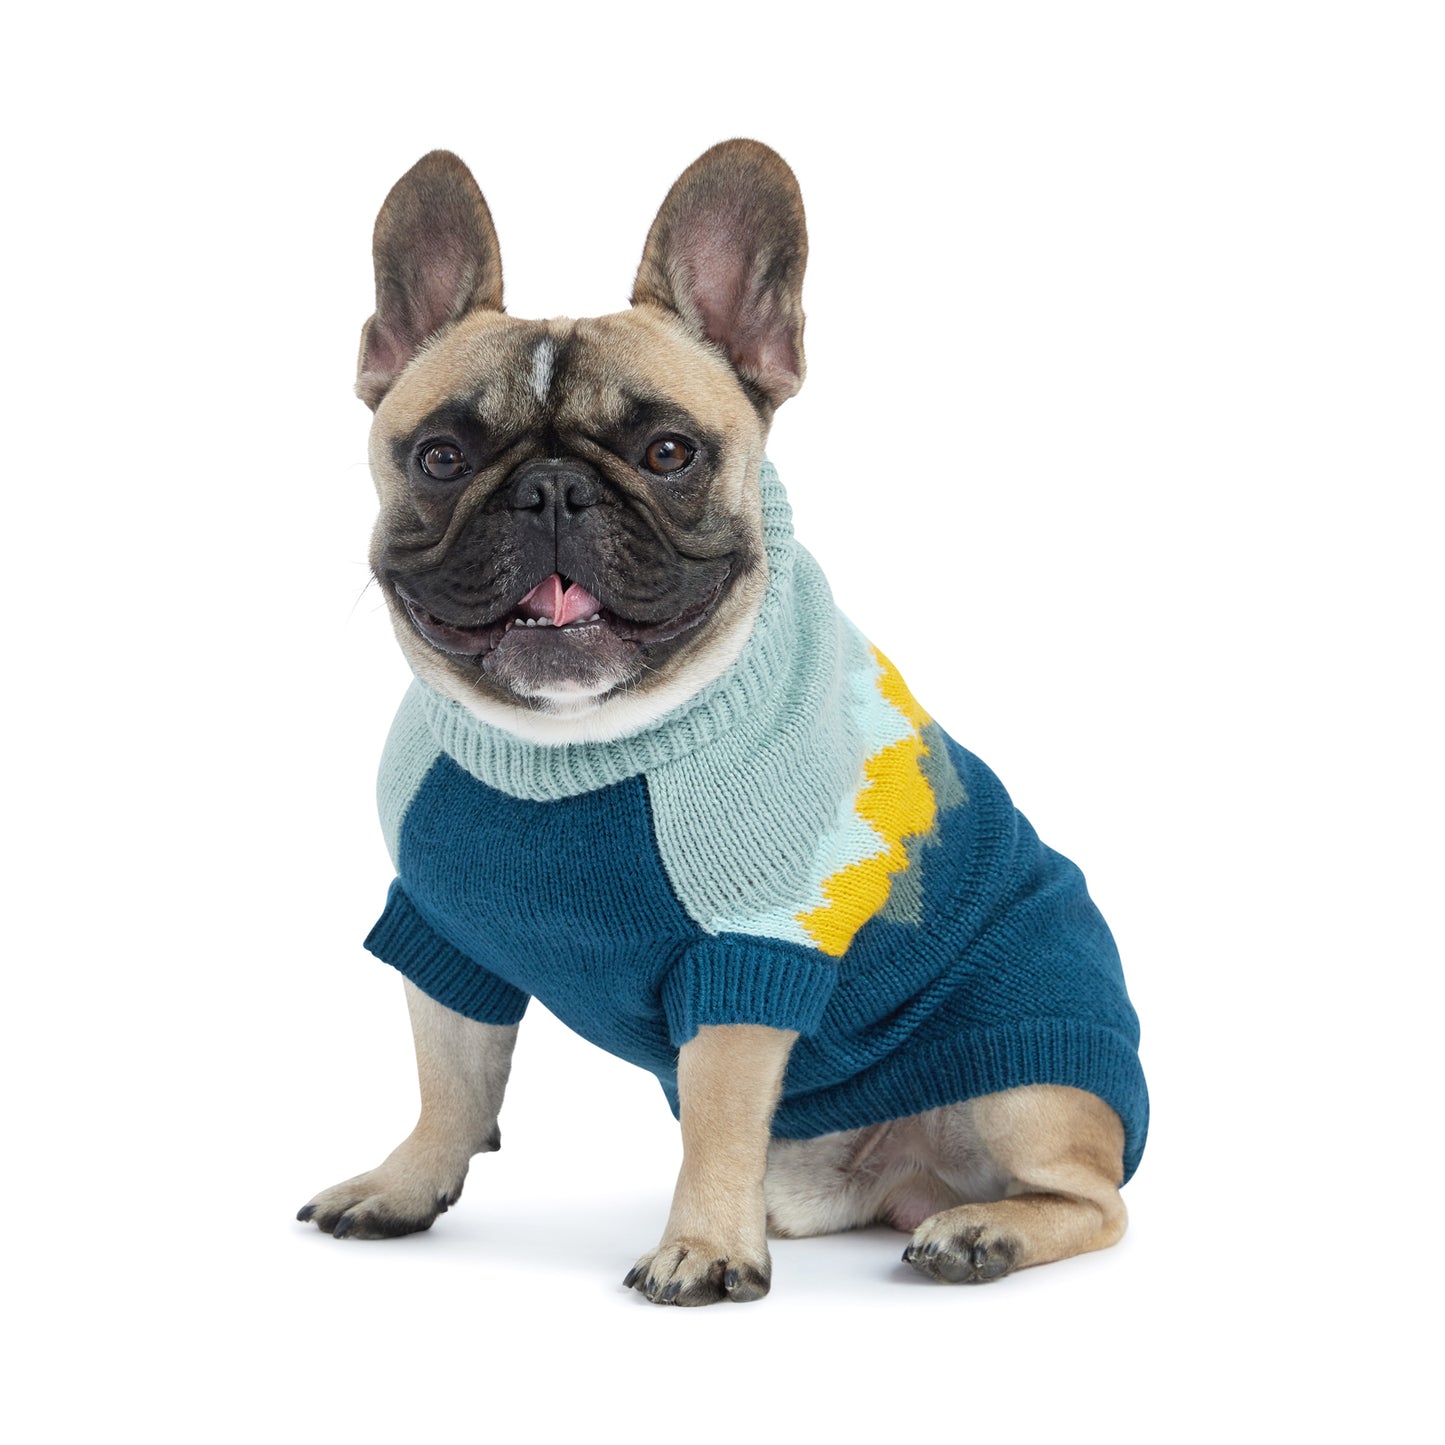 a fawn french bulldog seated, wearing a dark teal and light teal dog sweater with colorful mountain peaks graphic